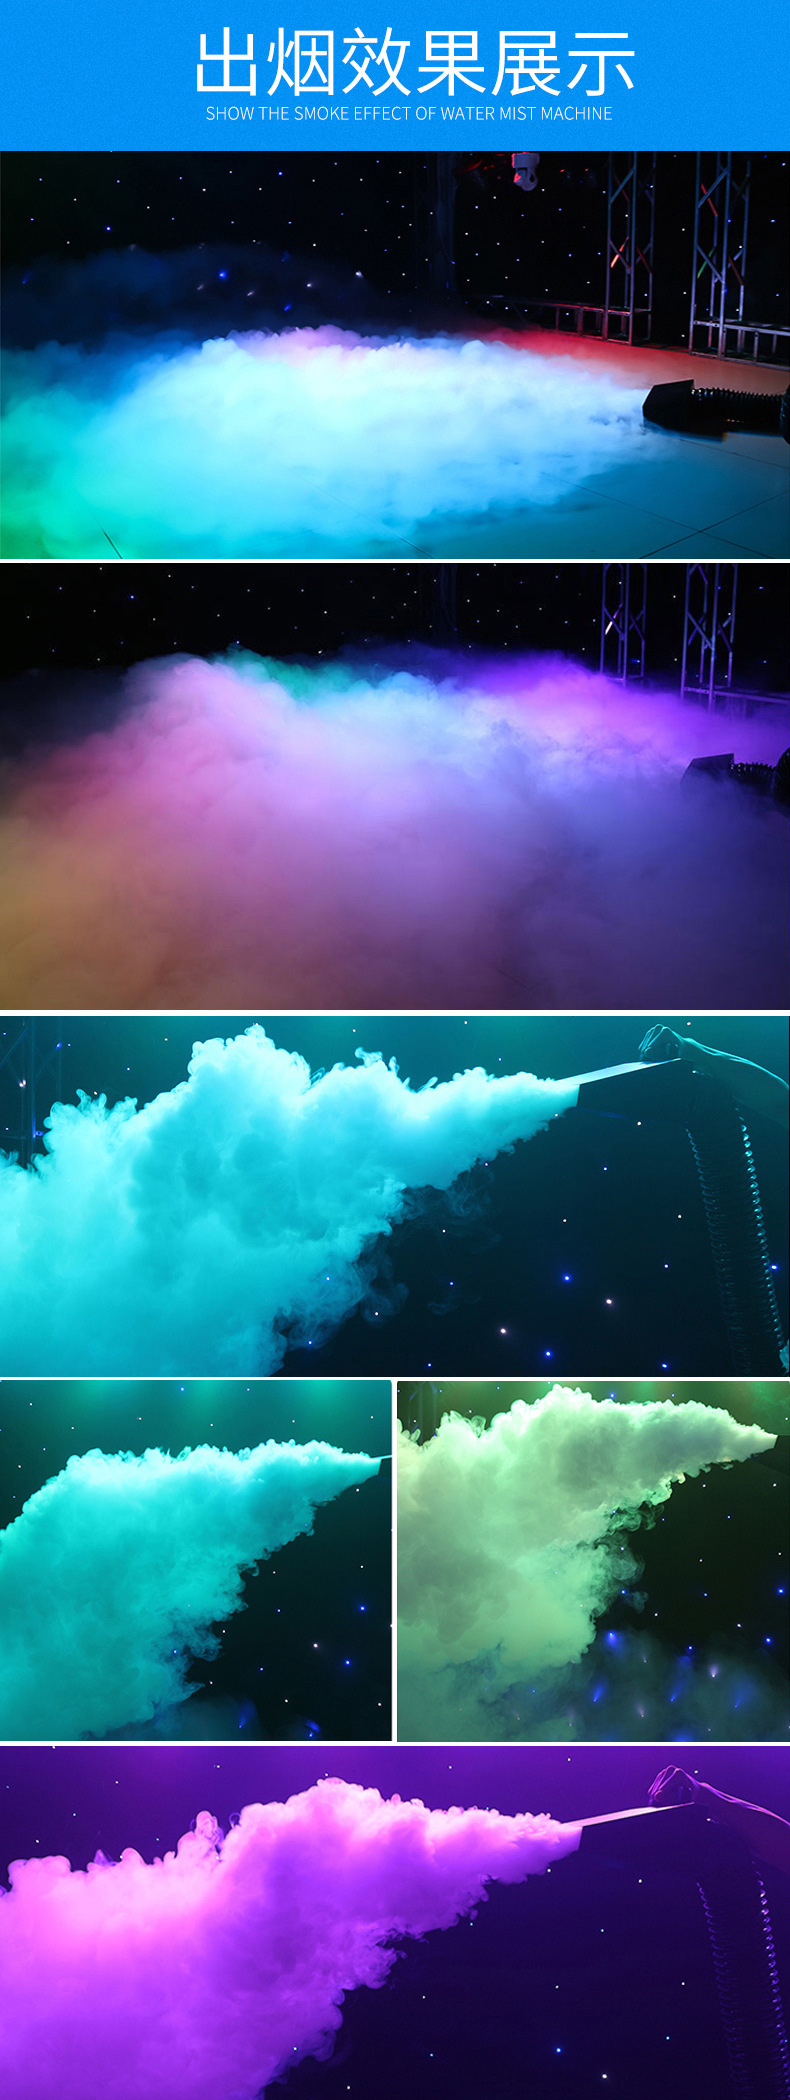 Mist Low Fog Machine (Use water and fog oil to make dry Ice machine effect) HS-BMLF2000 - Stage Equipment - 3